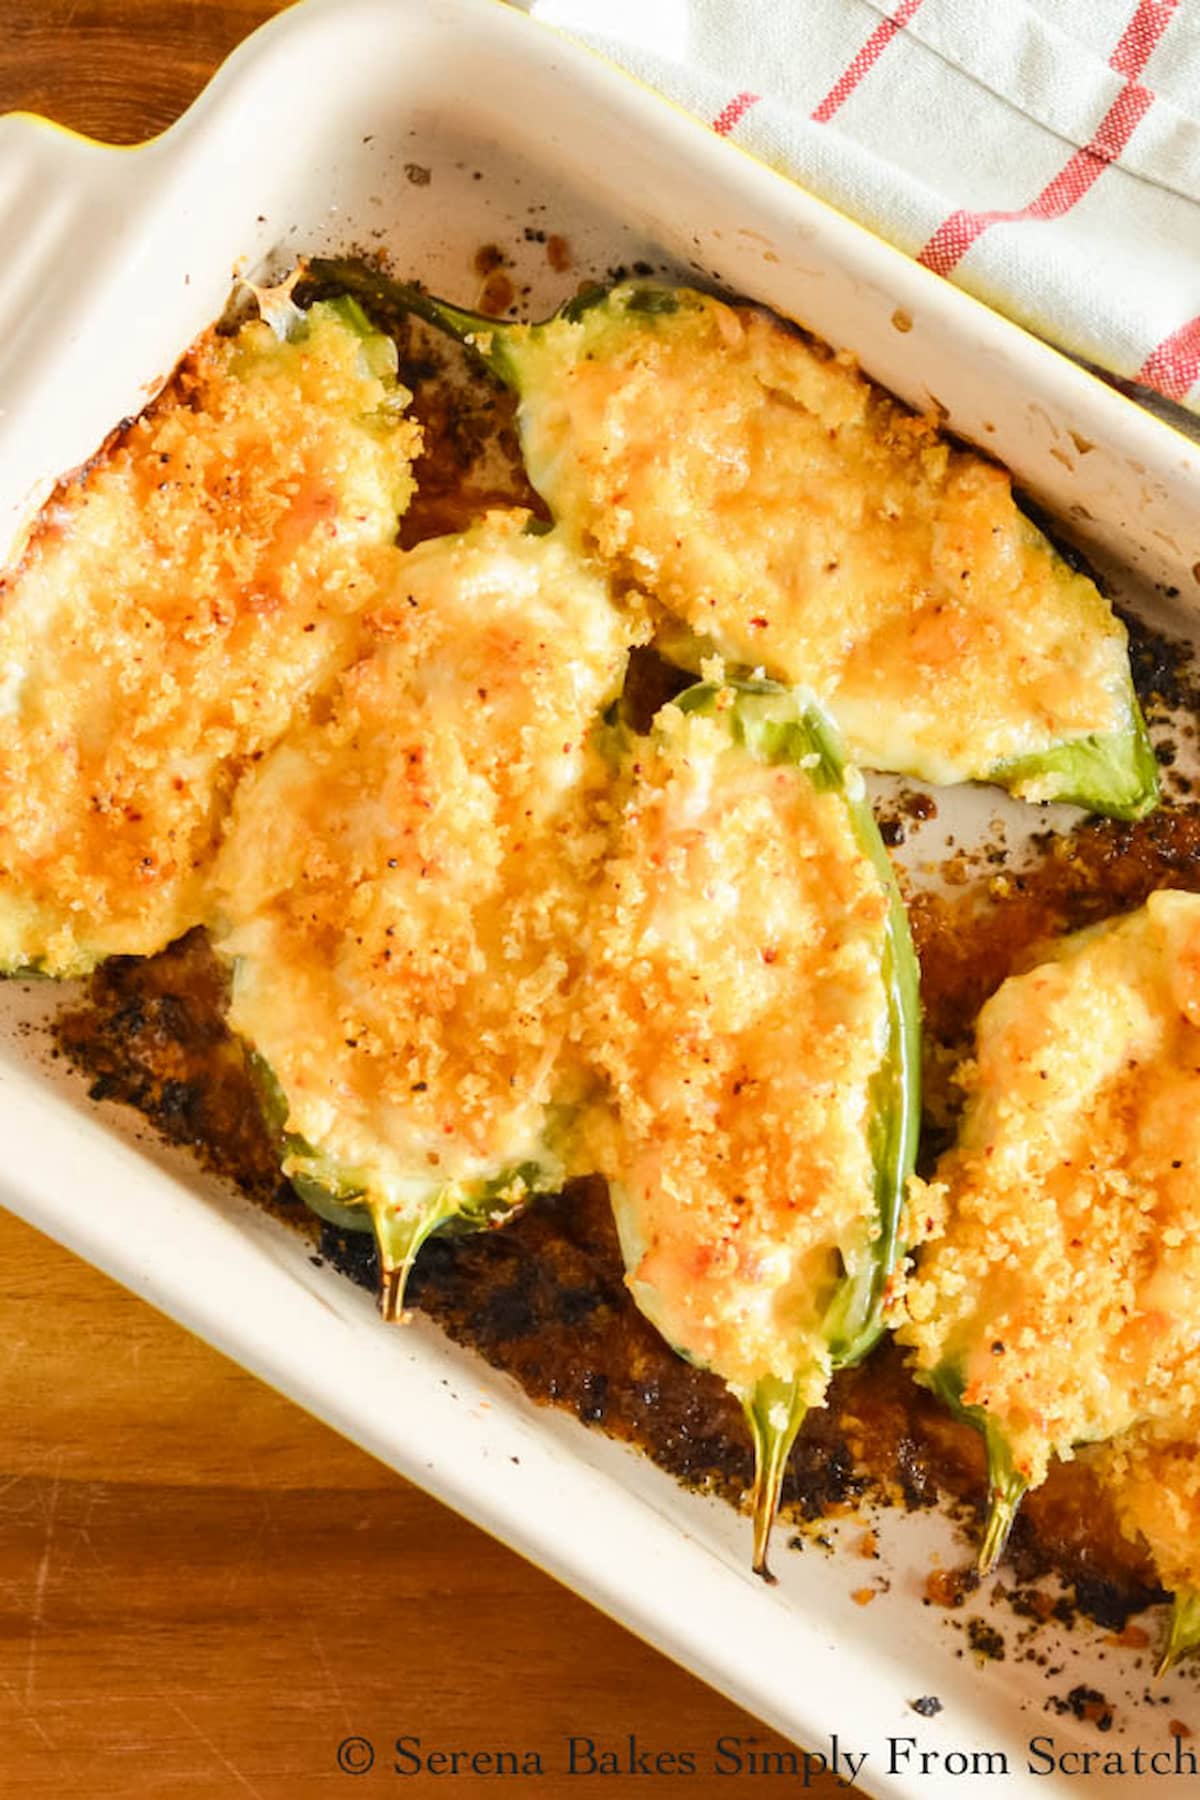 Shrimp Stuffed Jalapeno Poppers topped with panko bread crumbs baked in a small baking dish on a wooden cutting board.